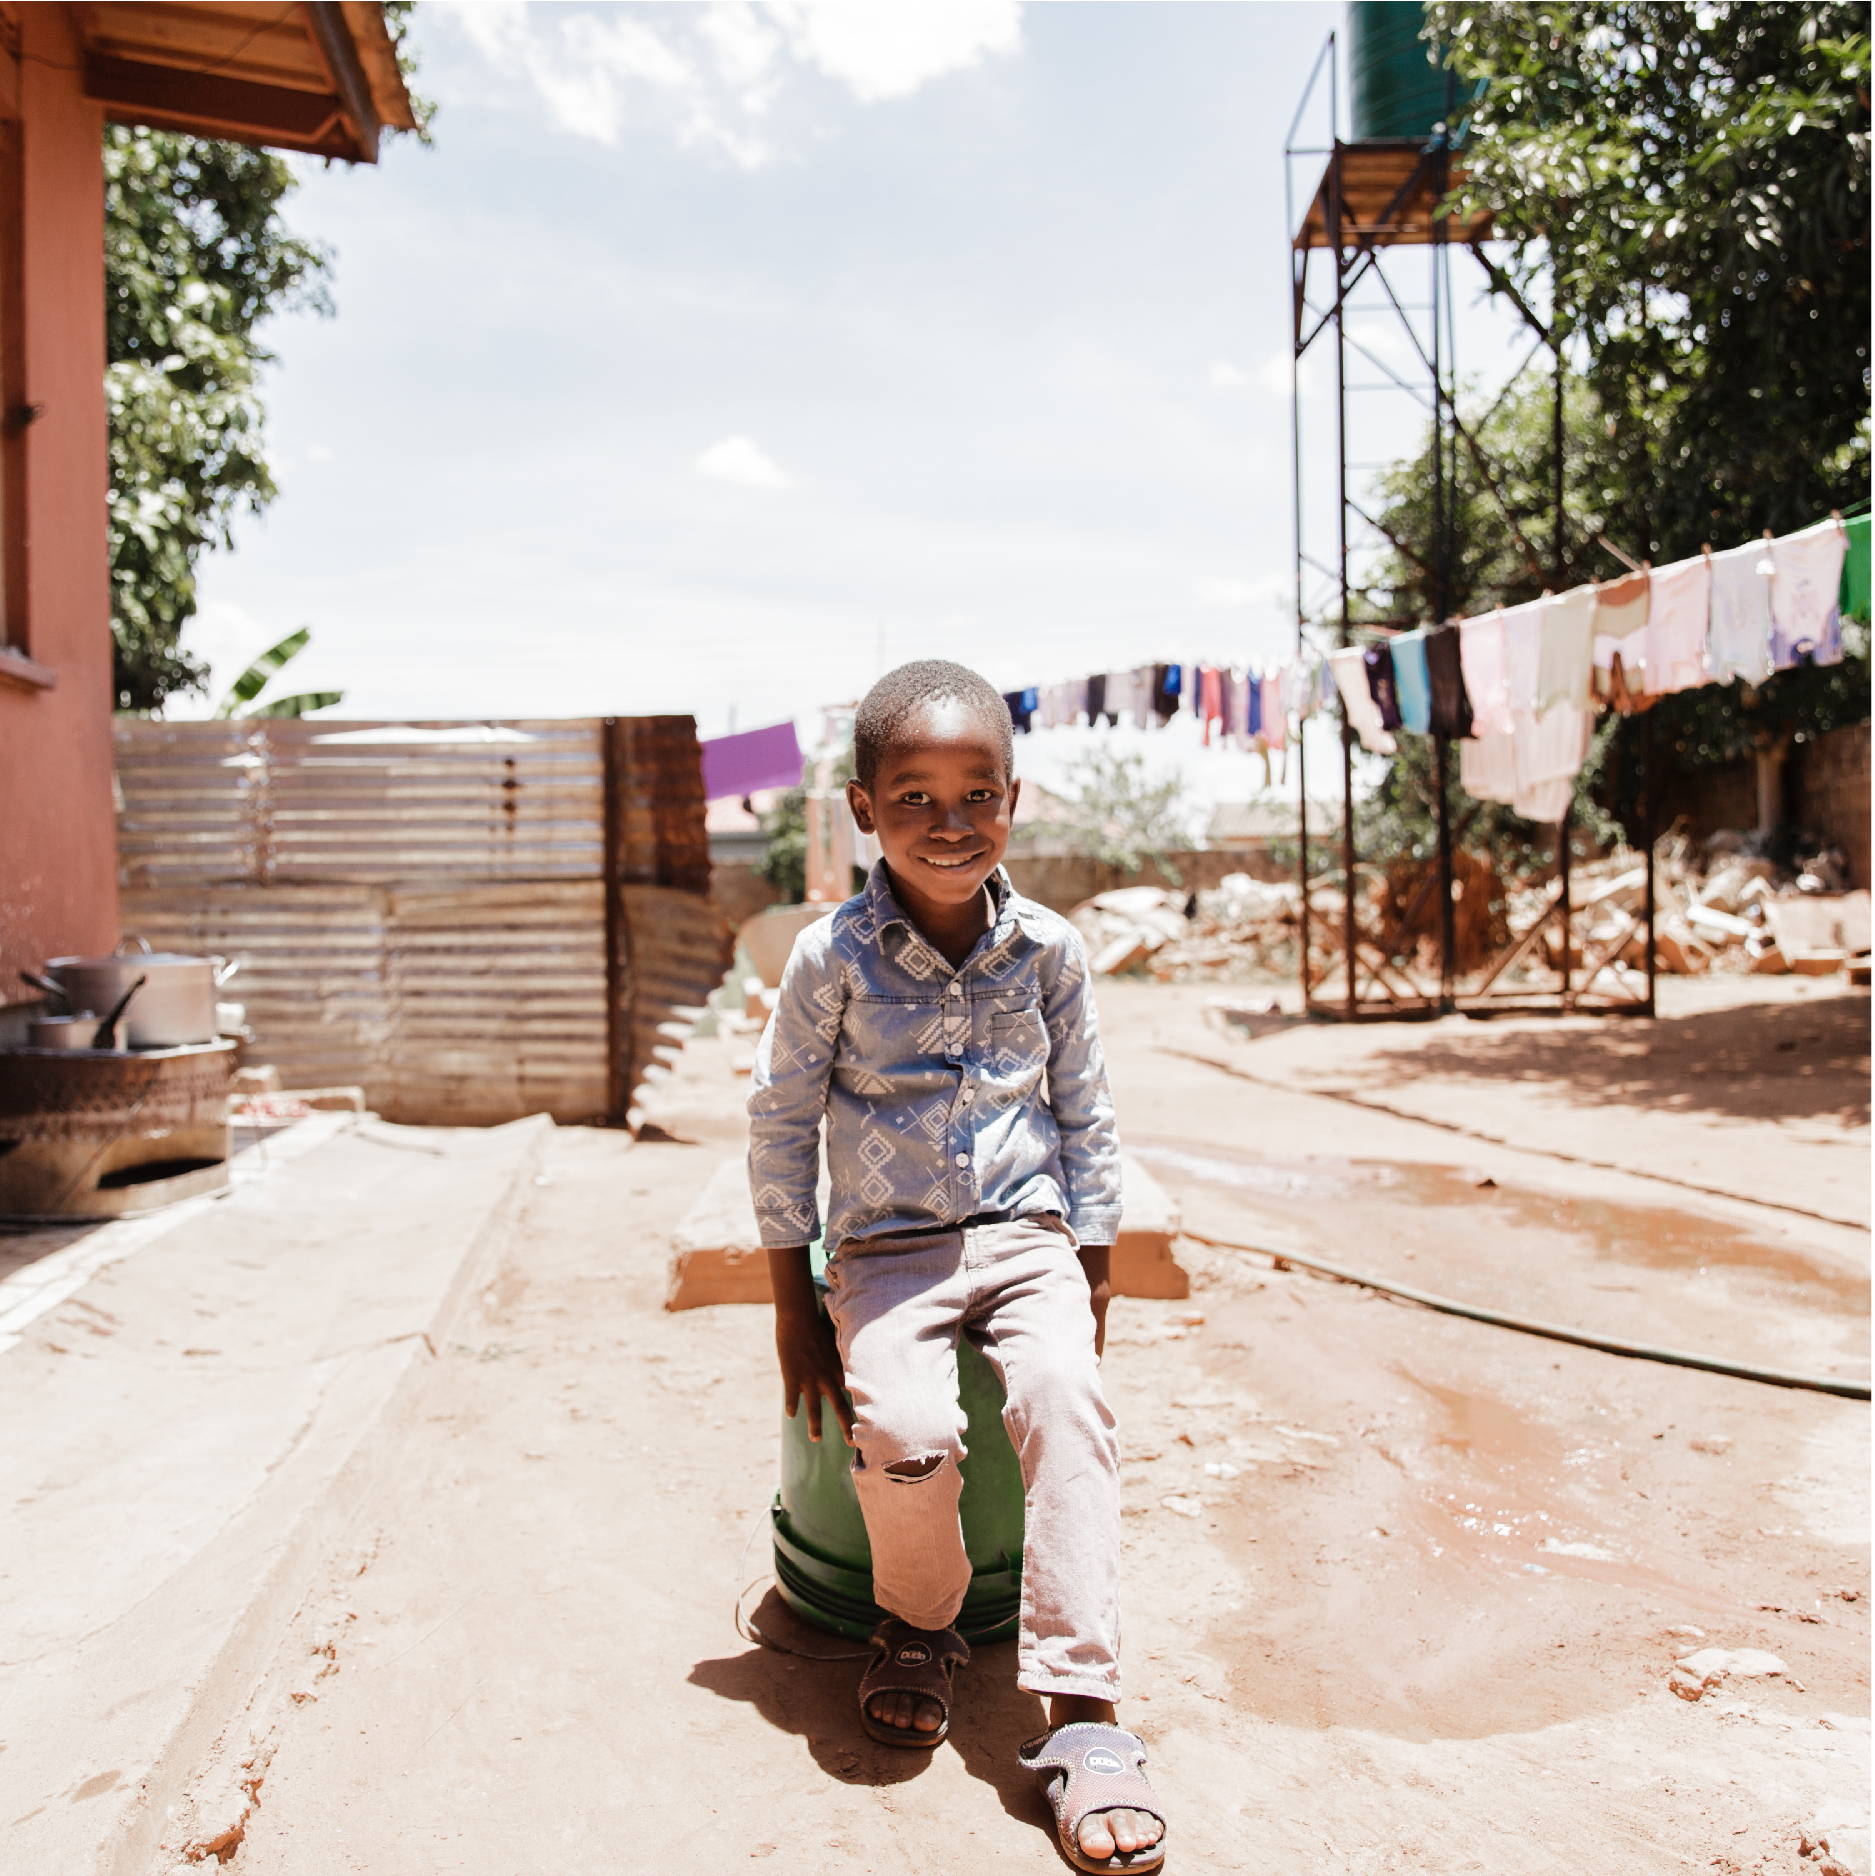 A young Zambian boy sits on a bucket outside his orphanage. The ground is very dry and clothes are hanging in the background